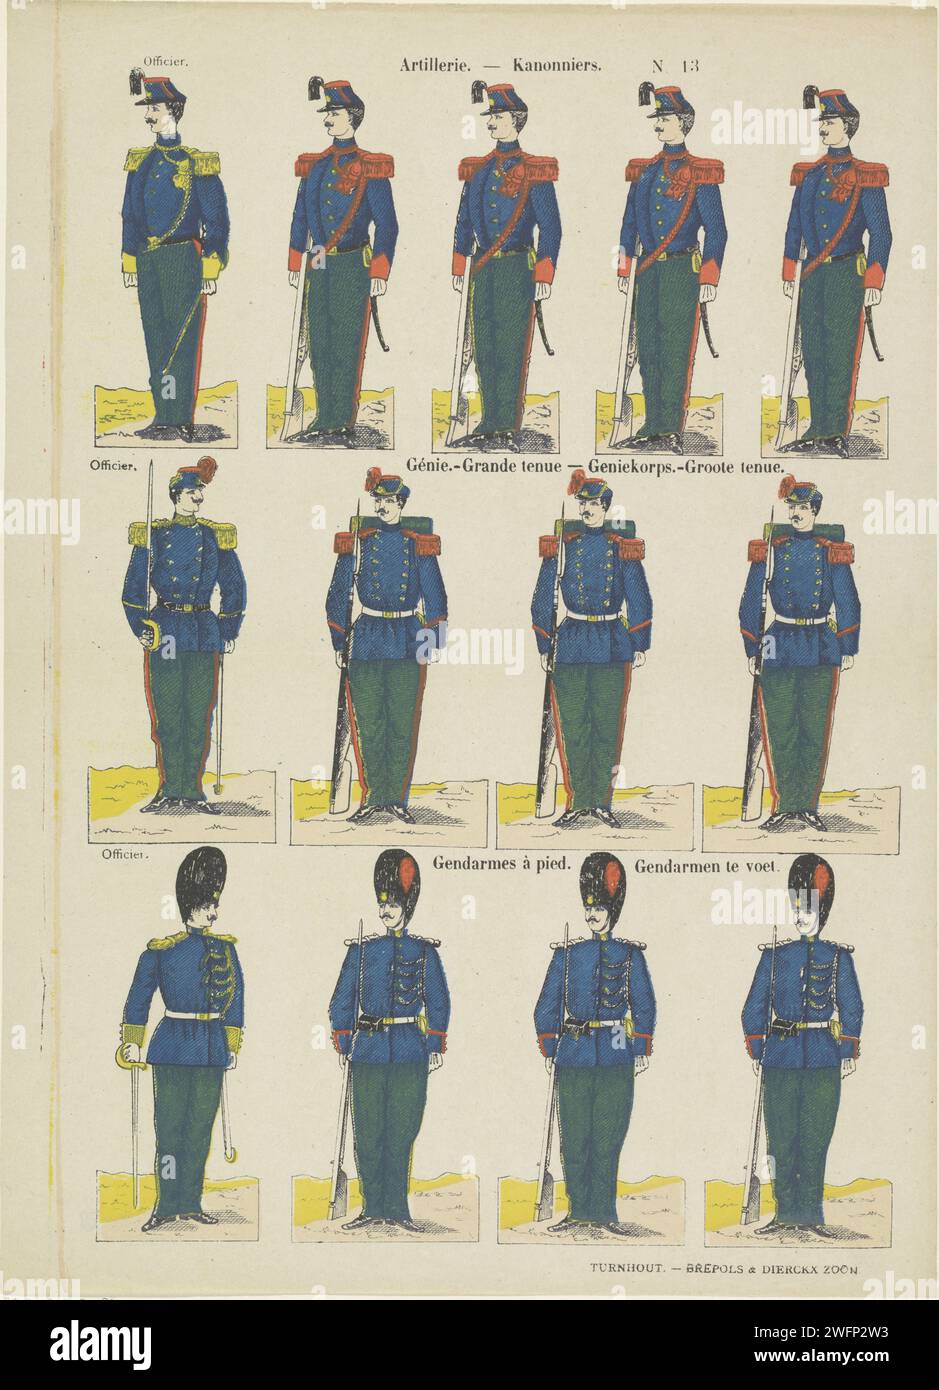 Artillery / Kanonniers / Genie. -Grande held / Griekorps Groote Double / Gendarmes on foot / Gendarmen Te Voet, 1833 - 1911 print Leaf with 3 horizontal rows with a total of 13 performances of officers and soldiers with guns. Numbered at the top right: N. 13. Turnwood paper letterpress printing the soldier; the soldier's life Stock Photo